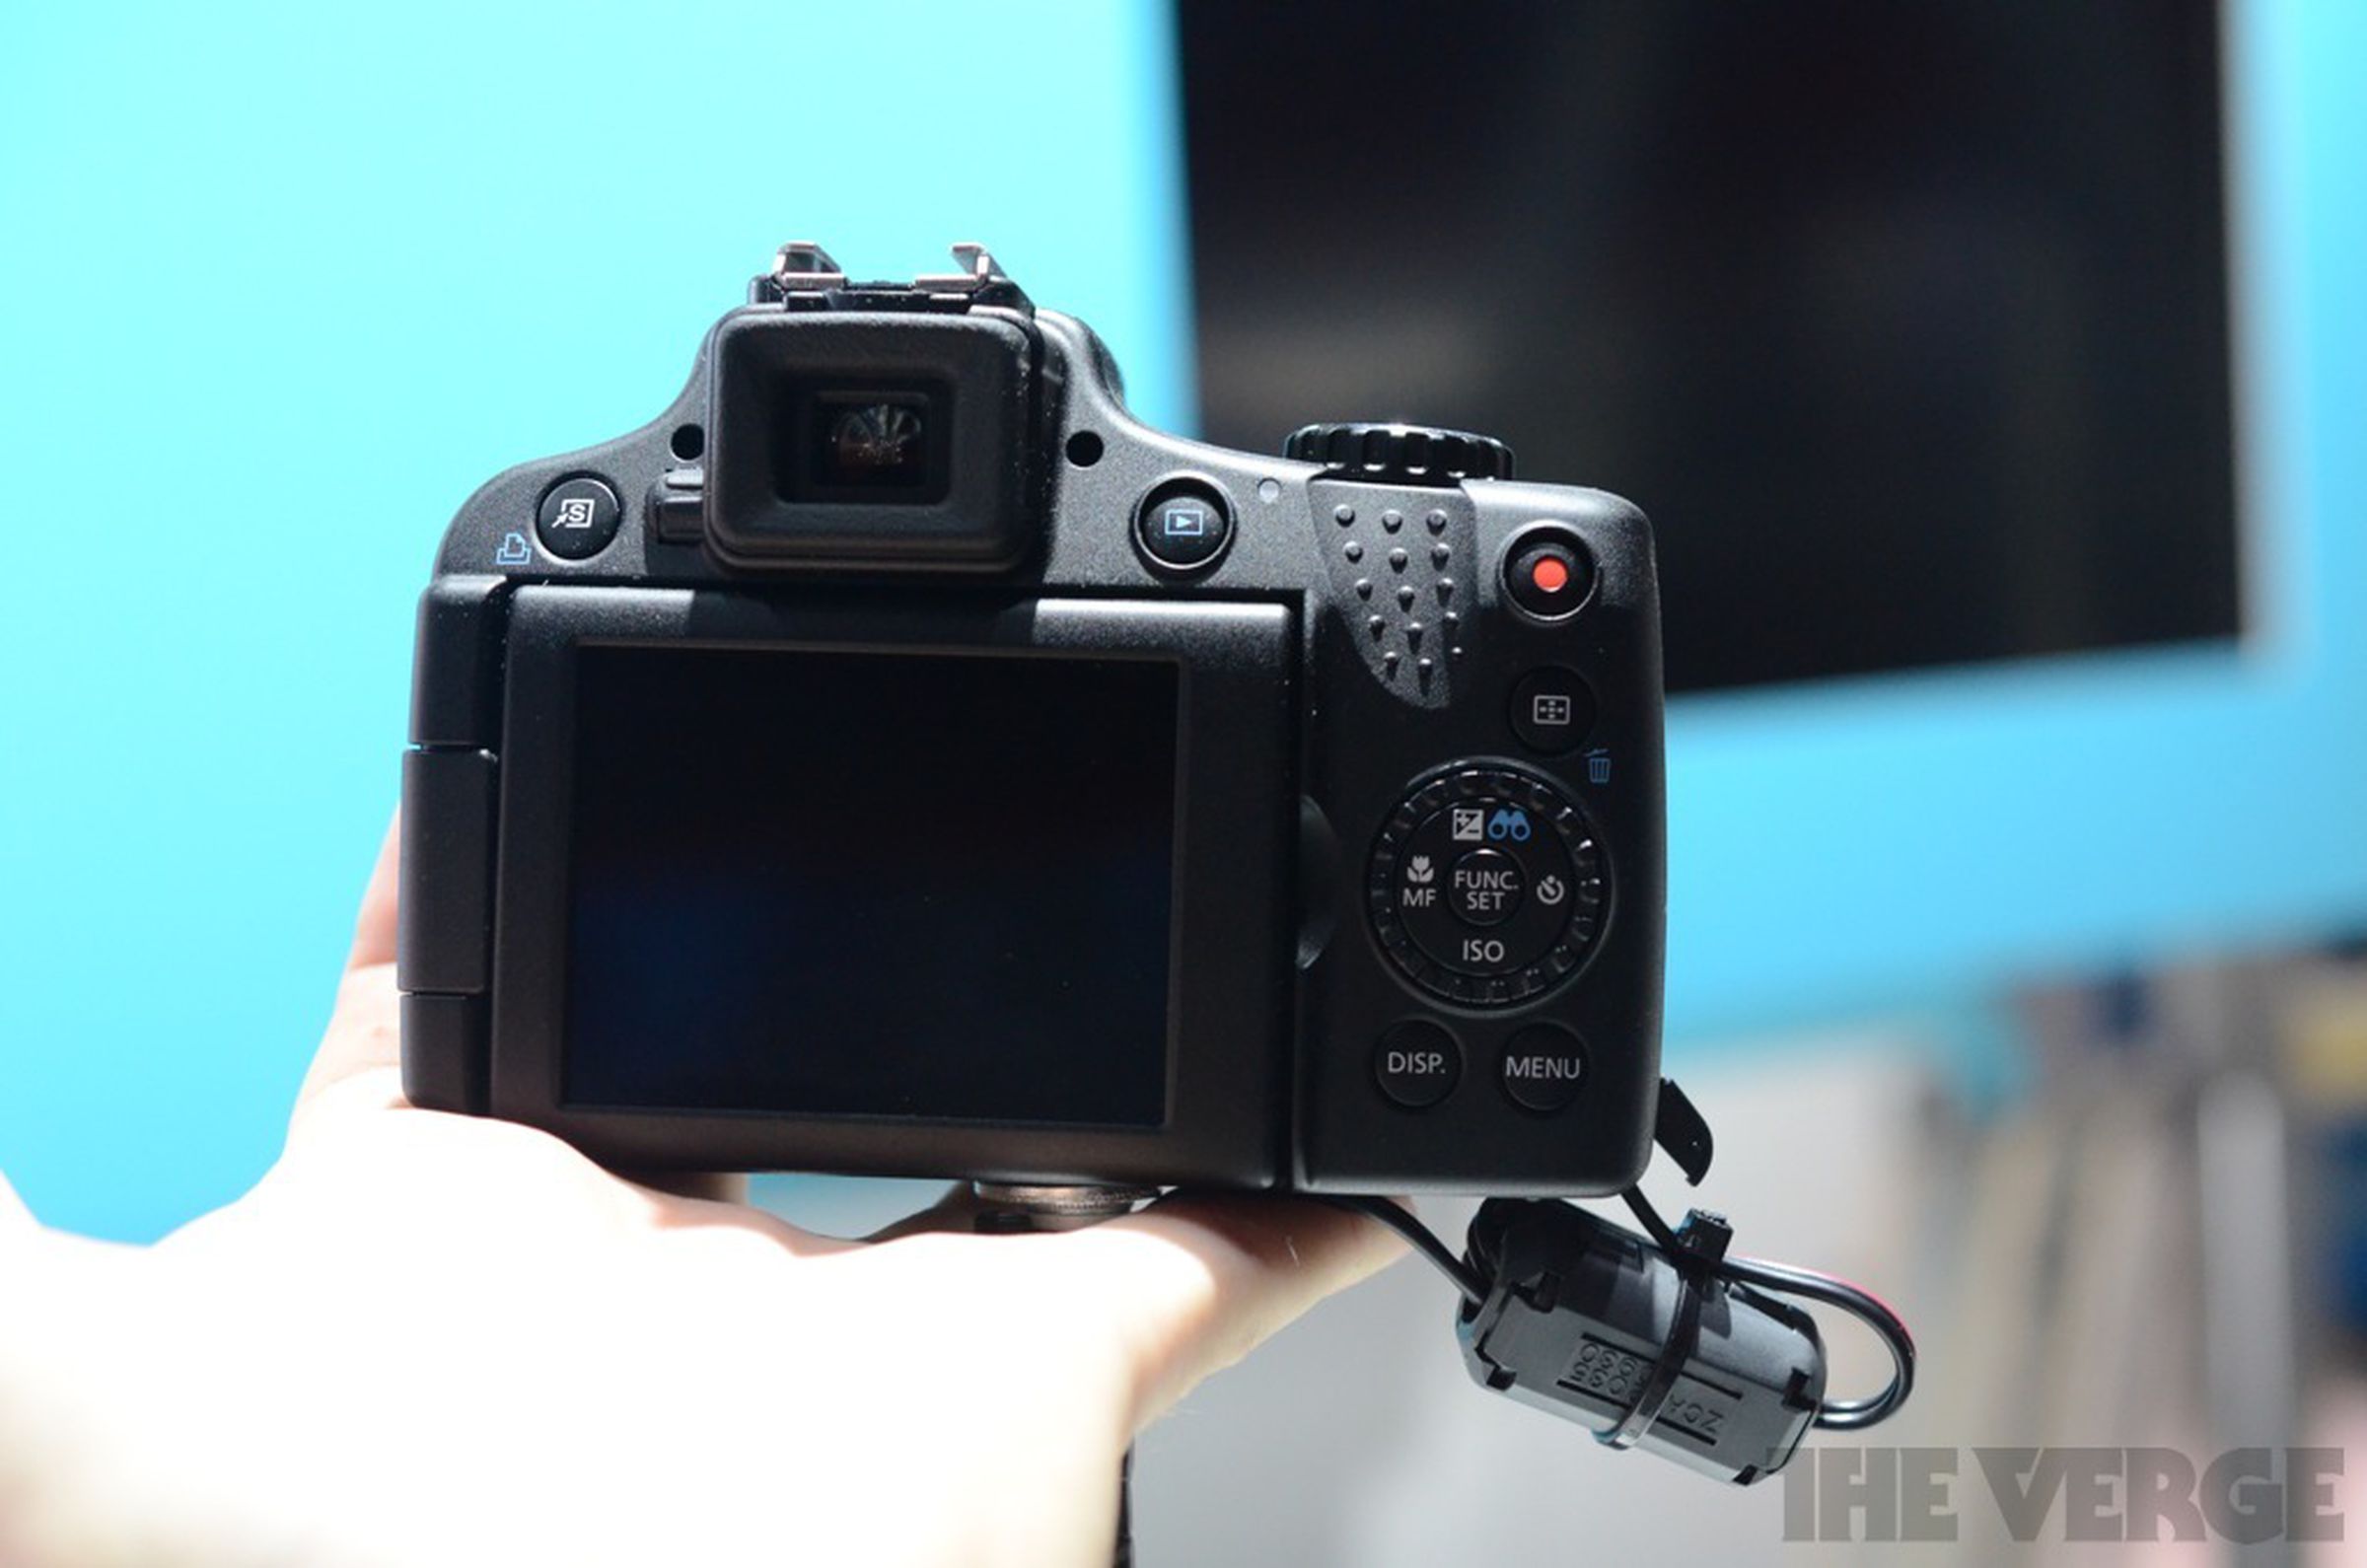 Canon G15, S110, SX50 HS hands-on pictures